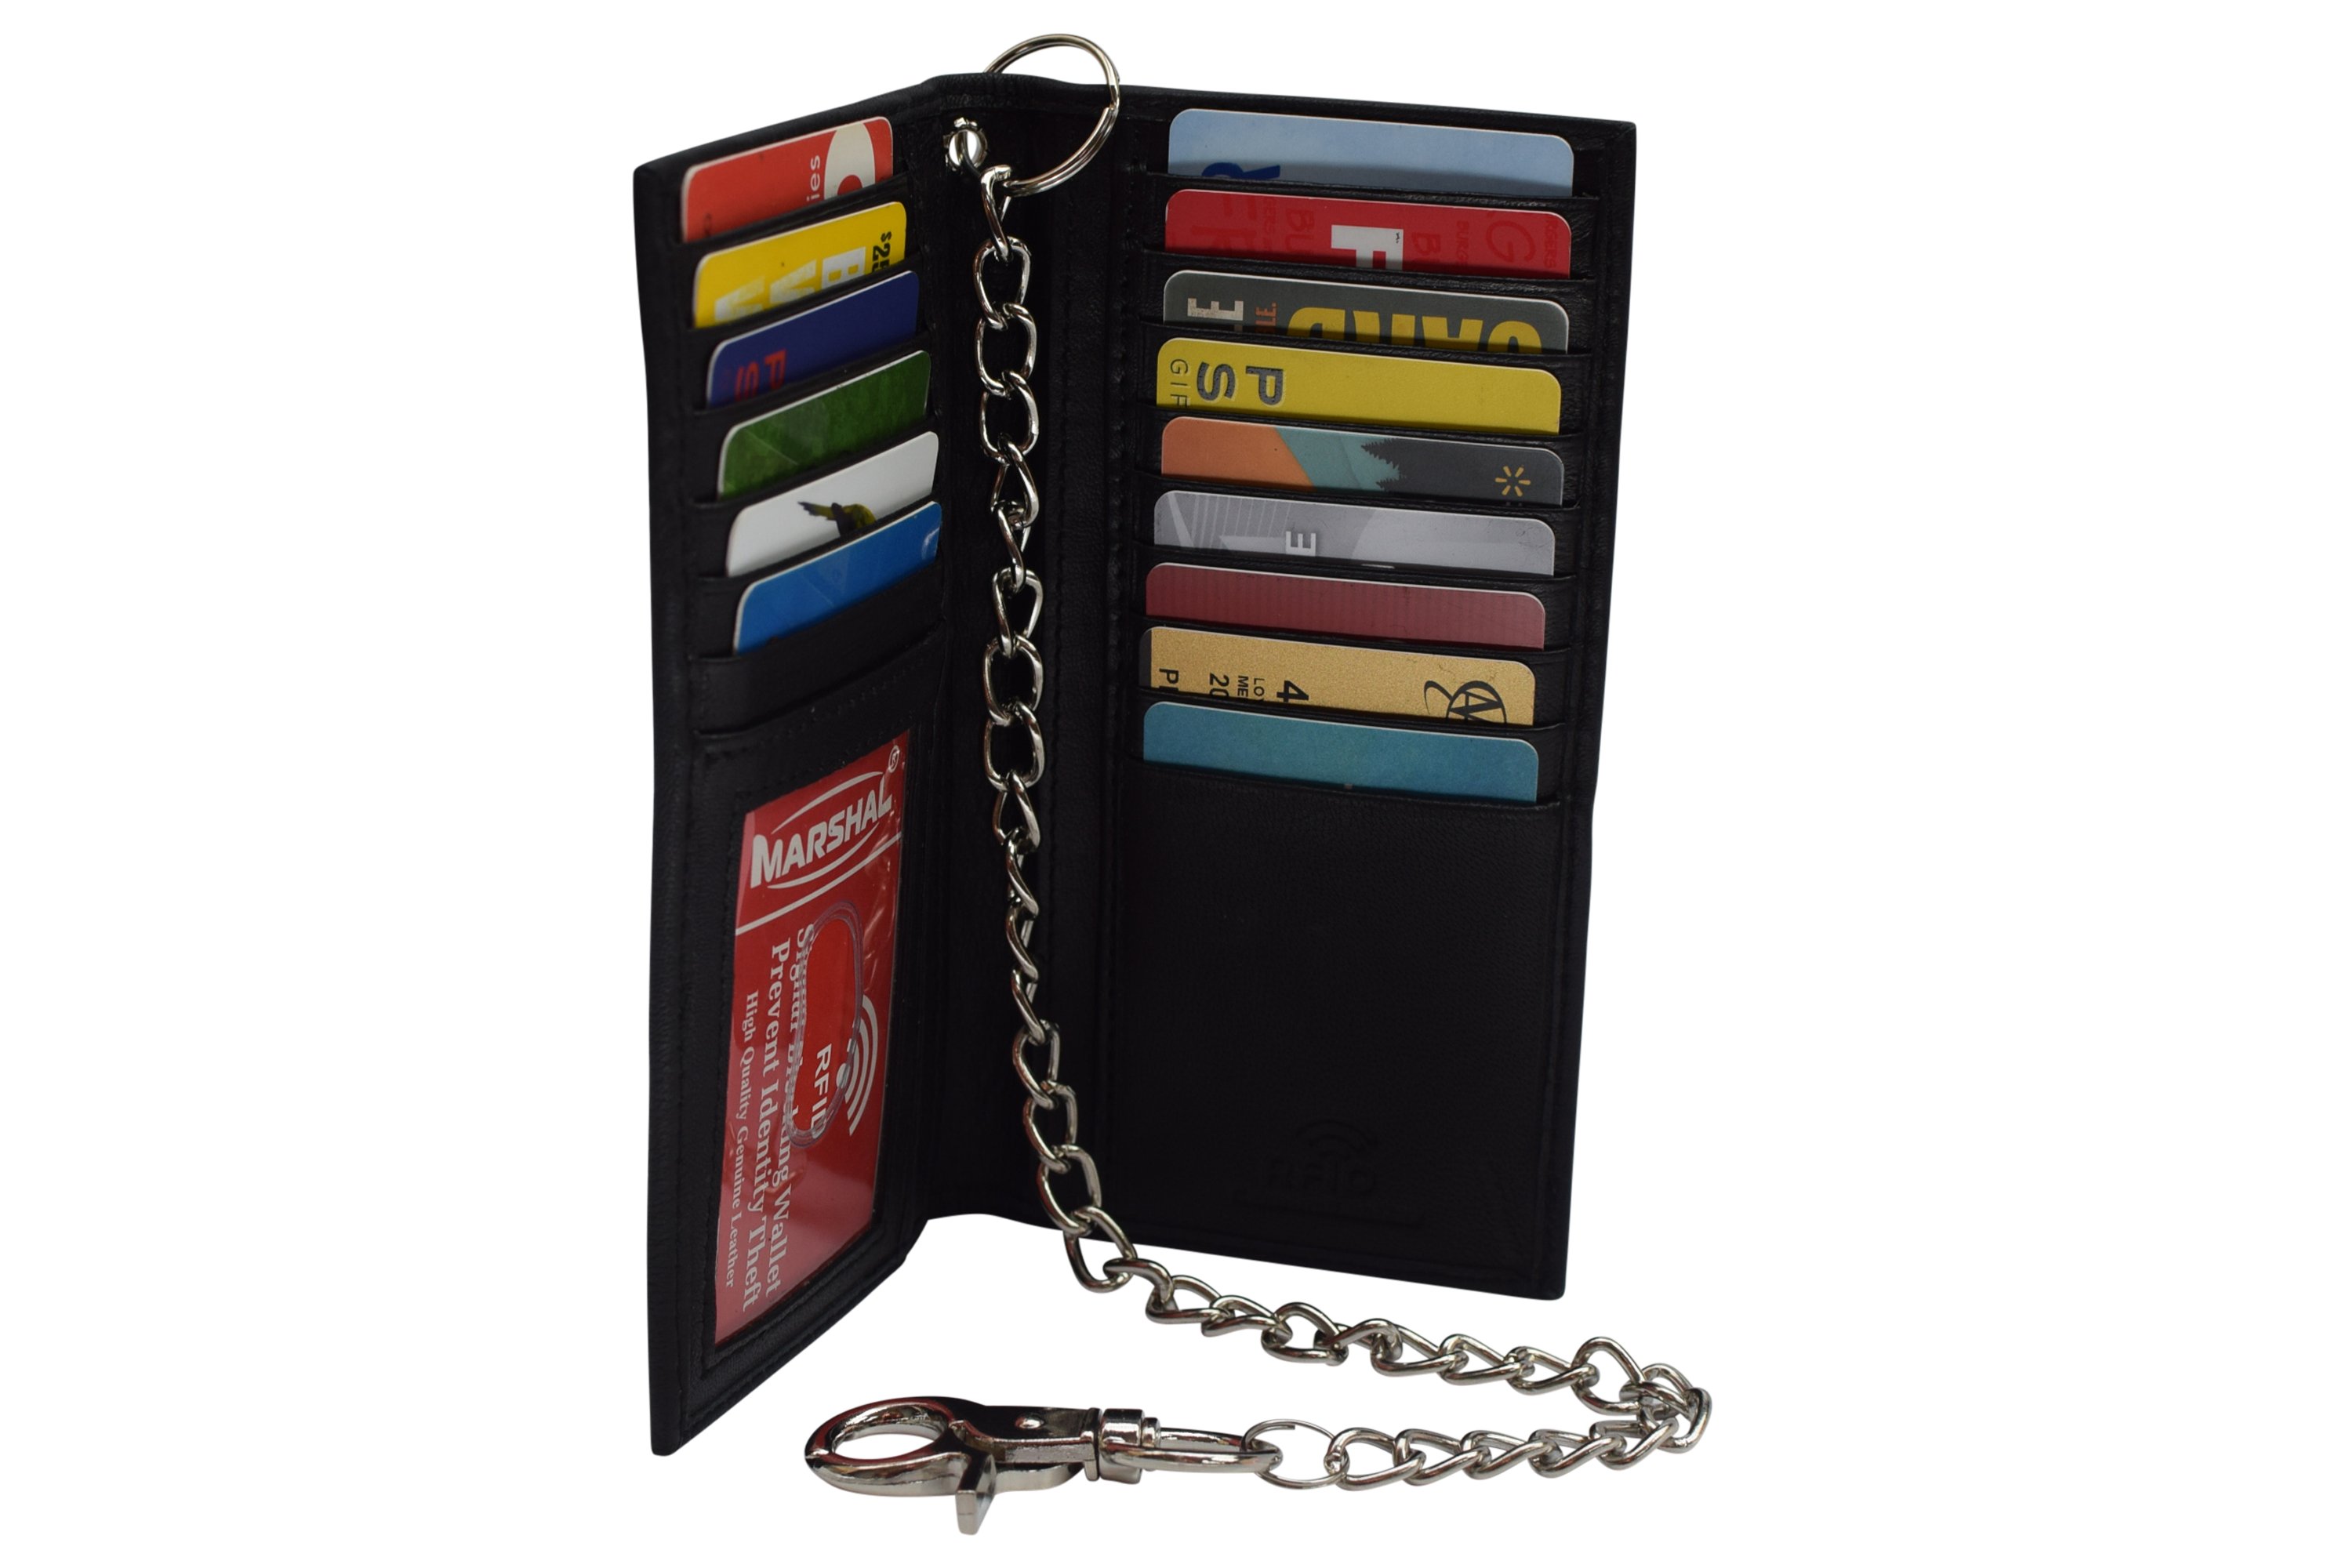 Marshal RFID Blocking Chain Wallets for Men Biker Long Bifold Genuine Leather Wallet with Chain (Black No Chain)